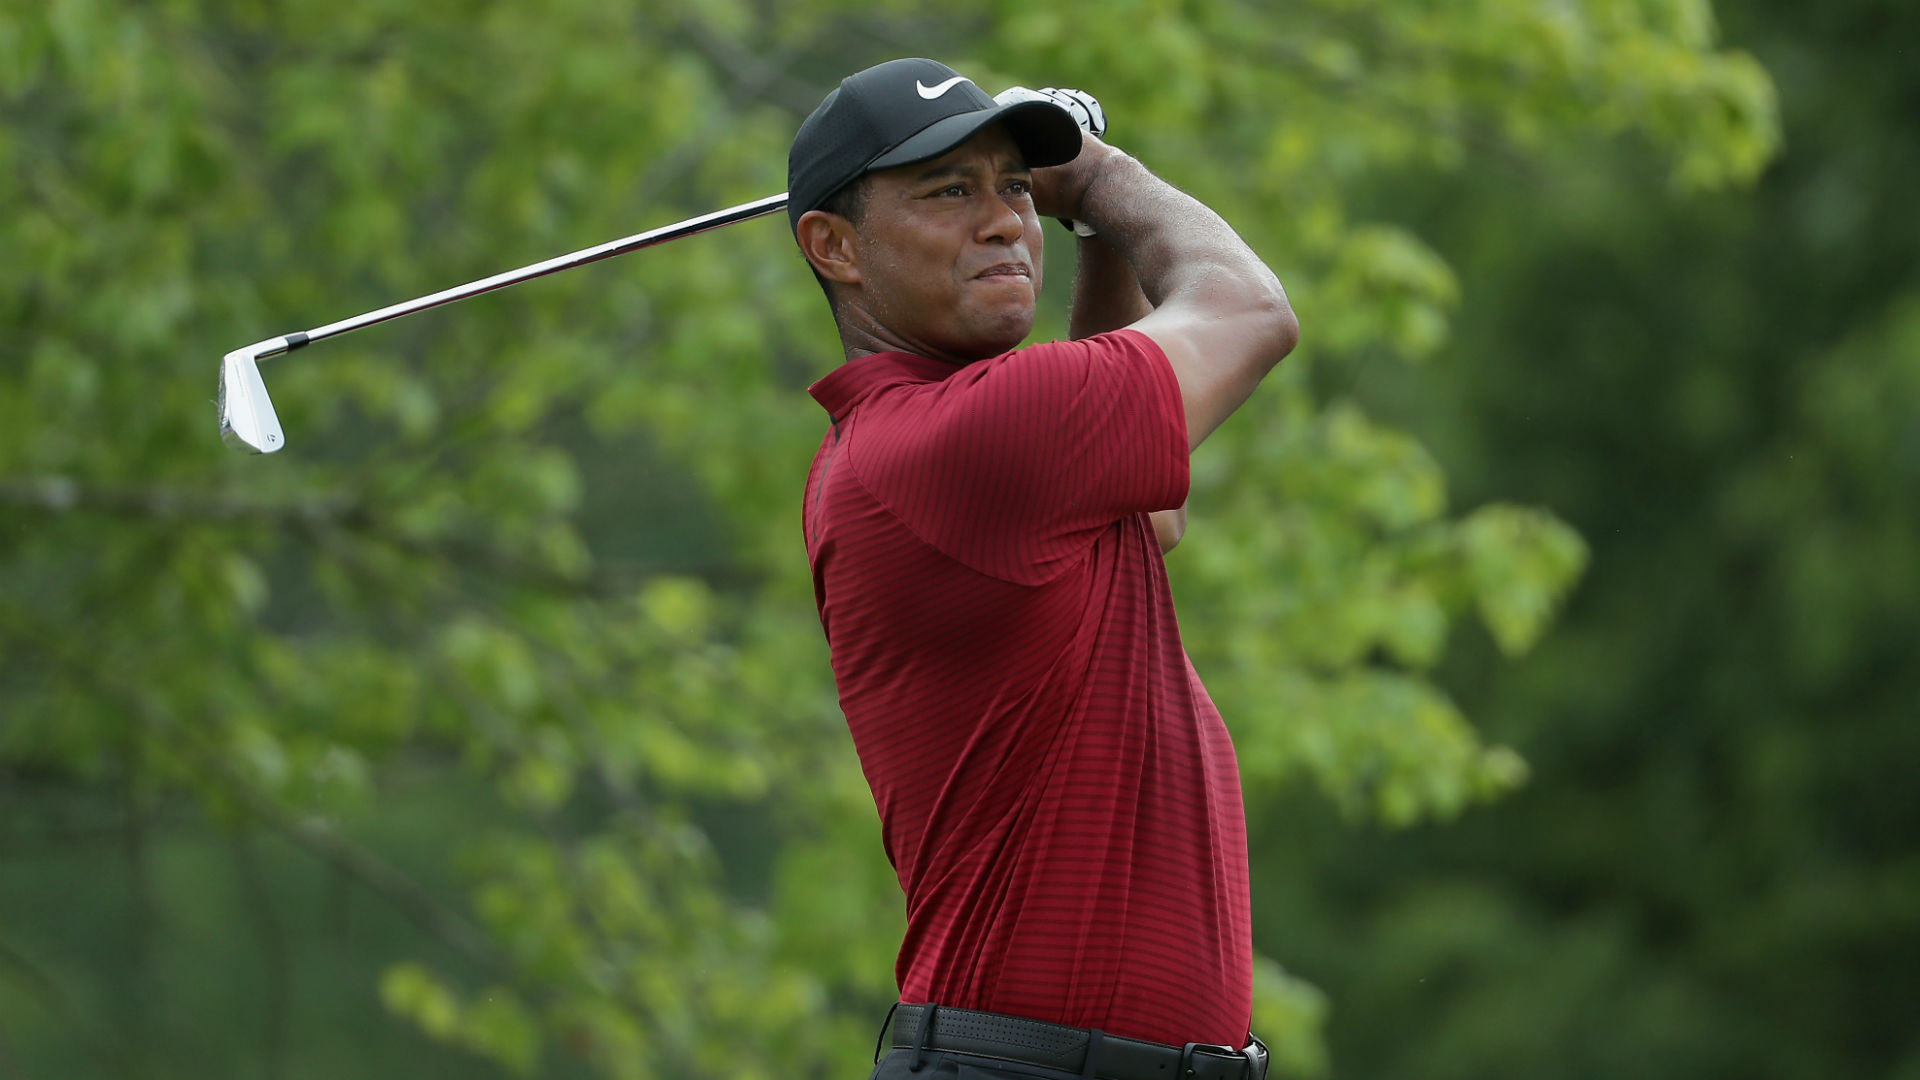 Tiger Woods score: Round 4 live updates, highlights from PGA Championship | Golf ...